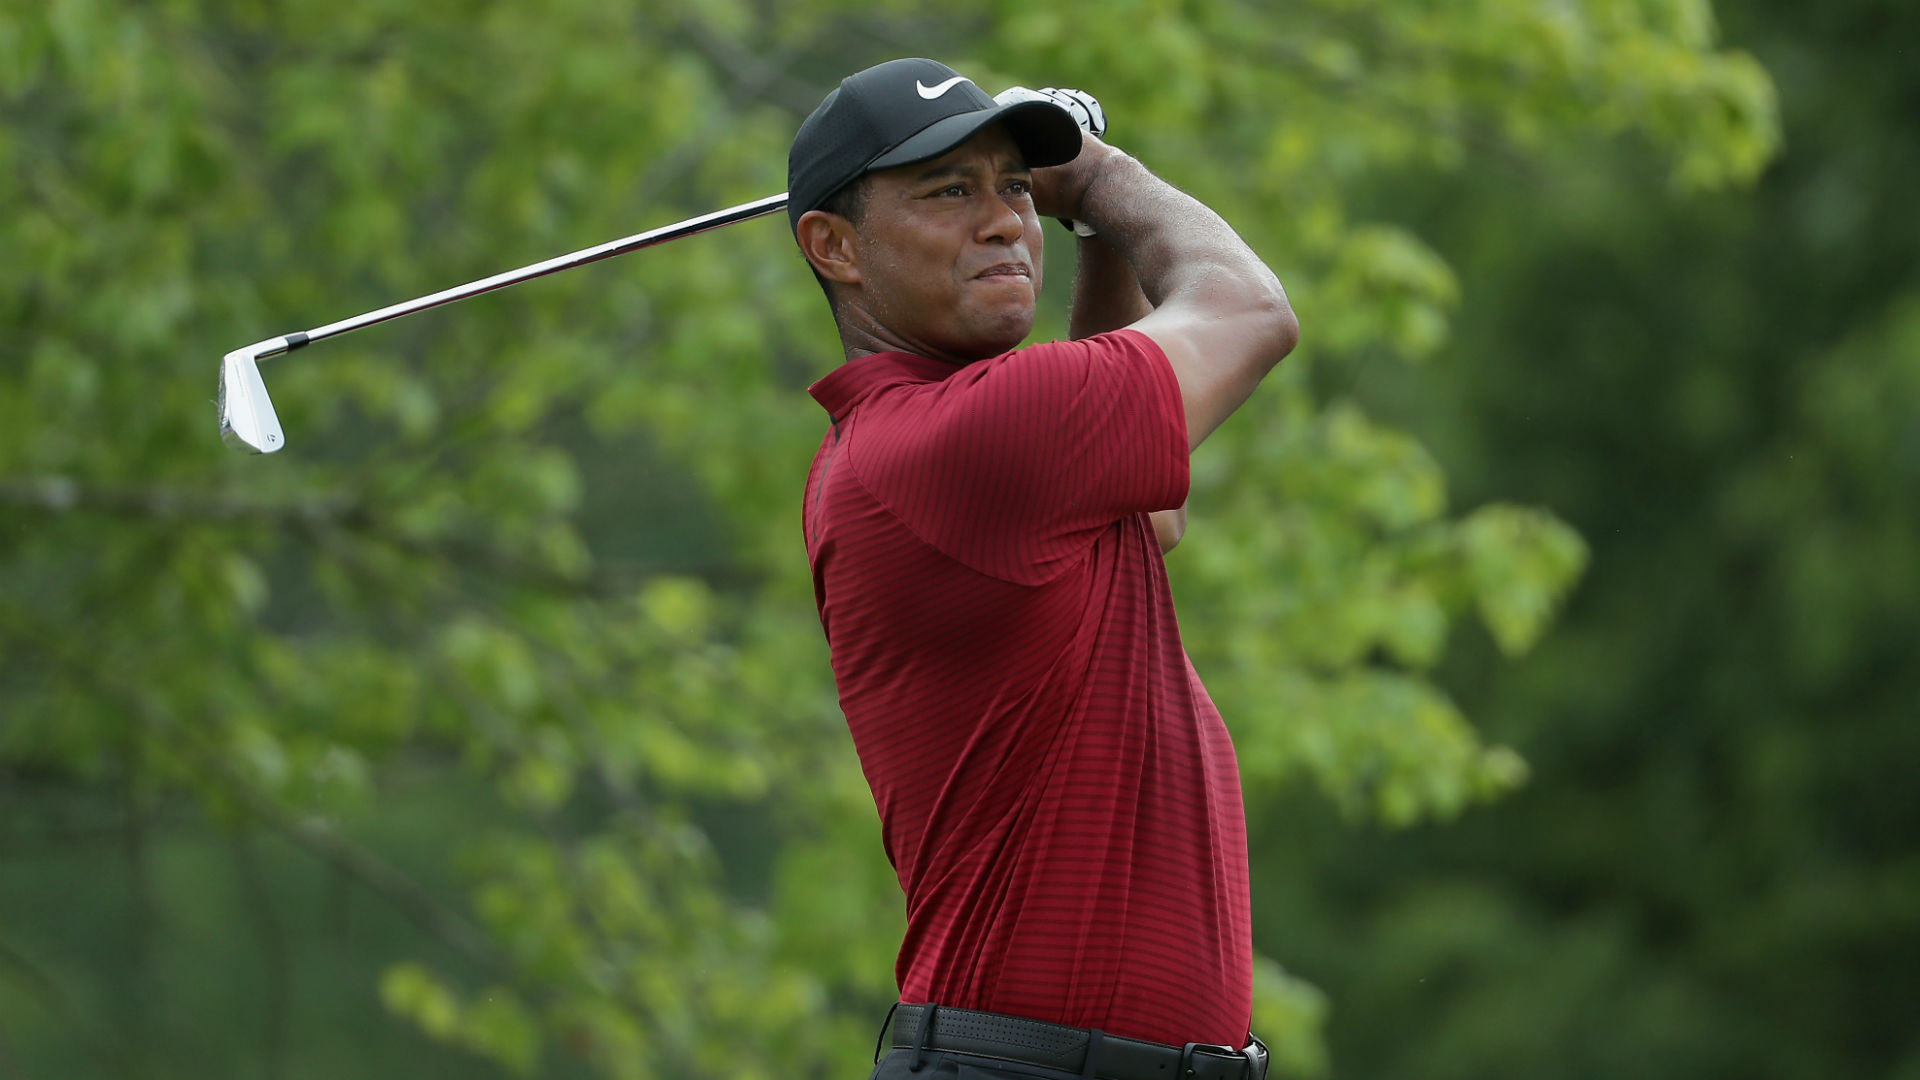 Tiger Woods score: Round 4 live updates, highlights from PGA Championship | Golf ...